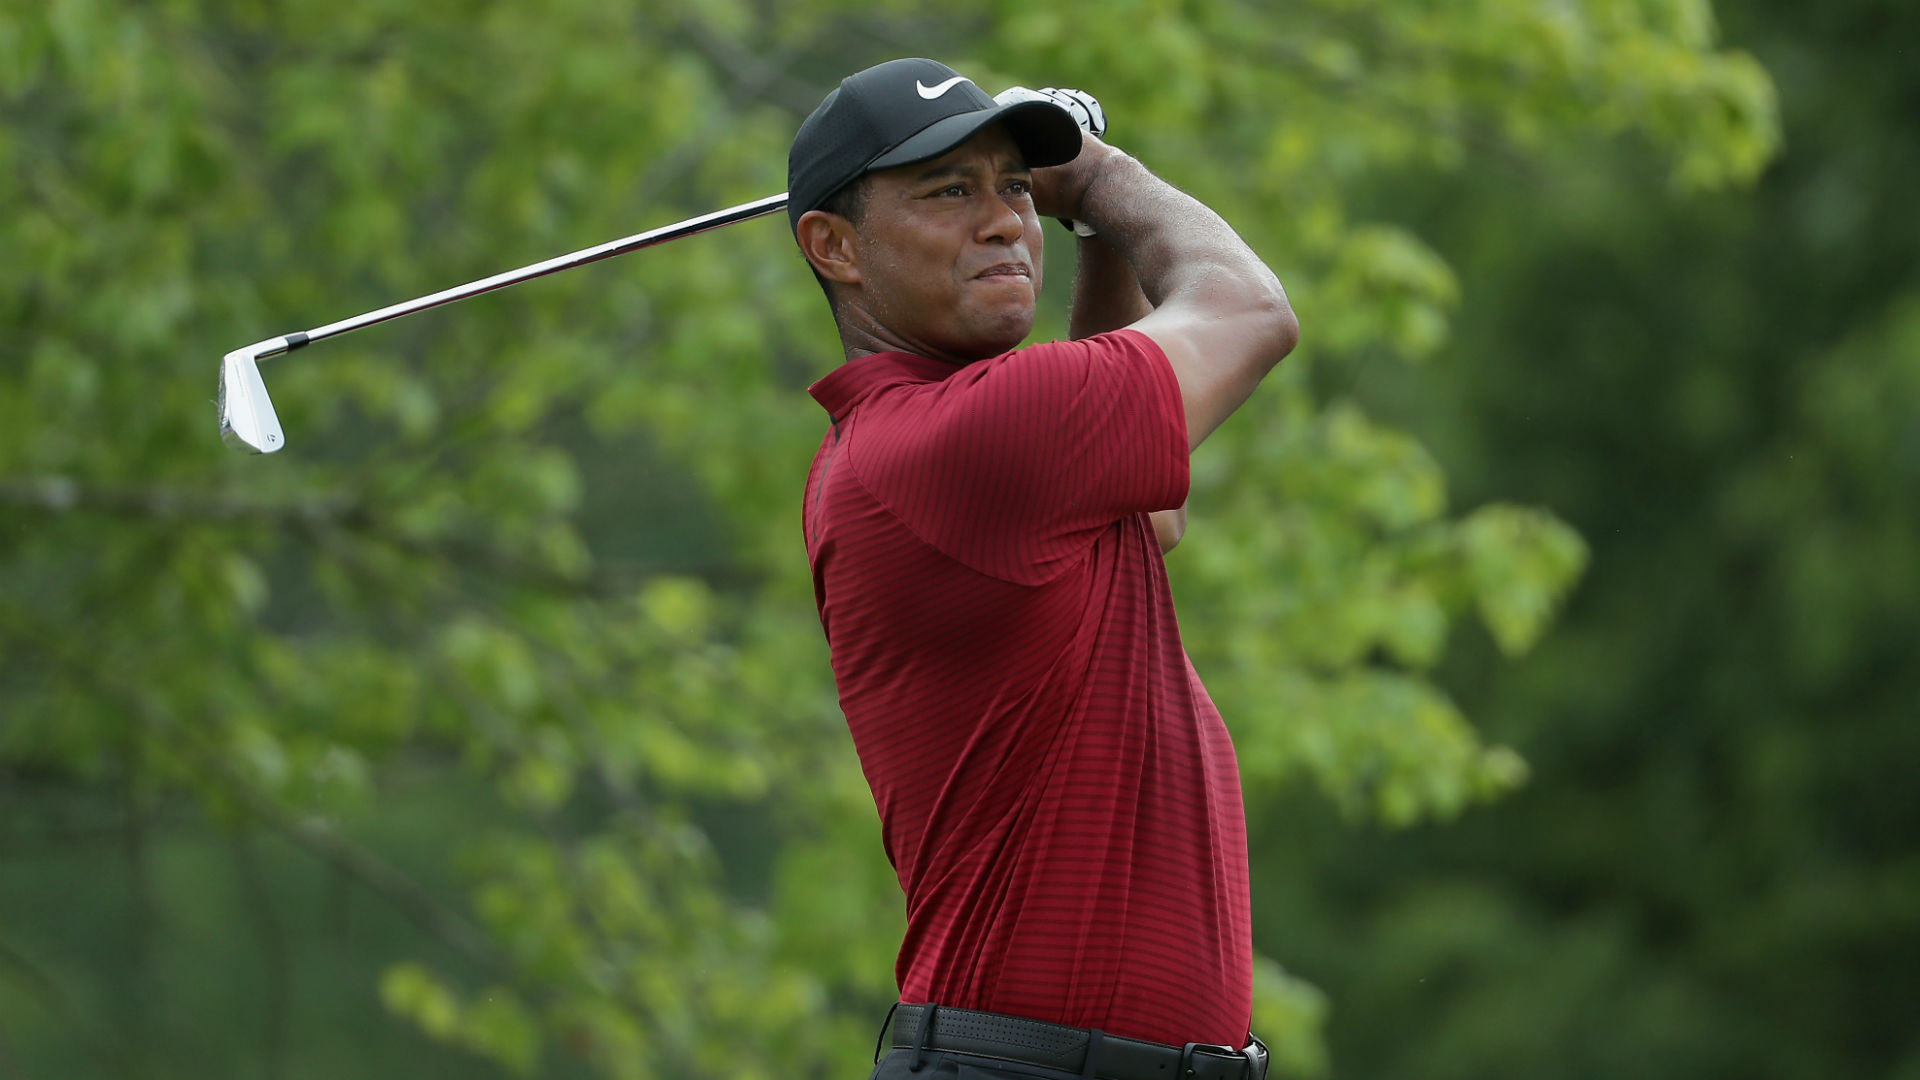 Tiger Woods score: Round 4 live updates, highlights from PGA Championship | Golf ...